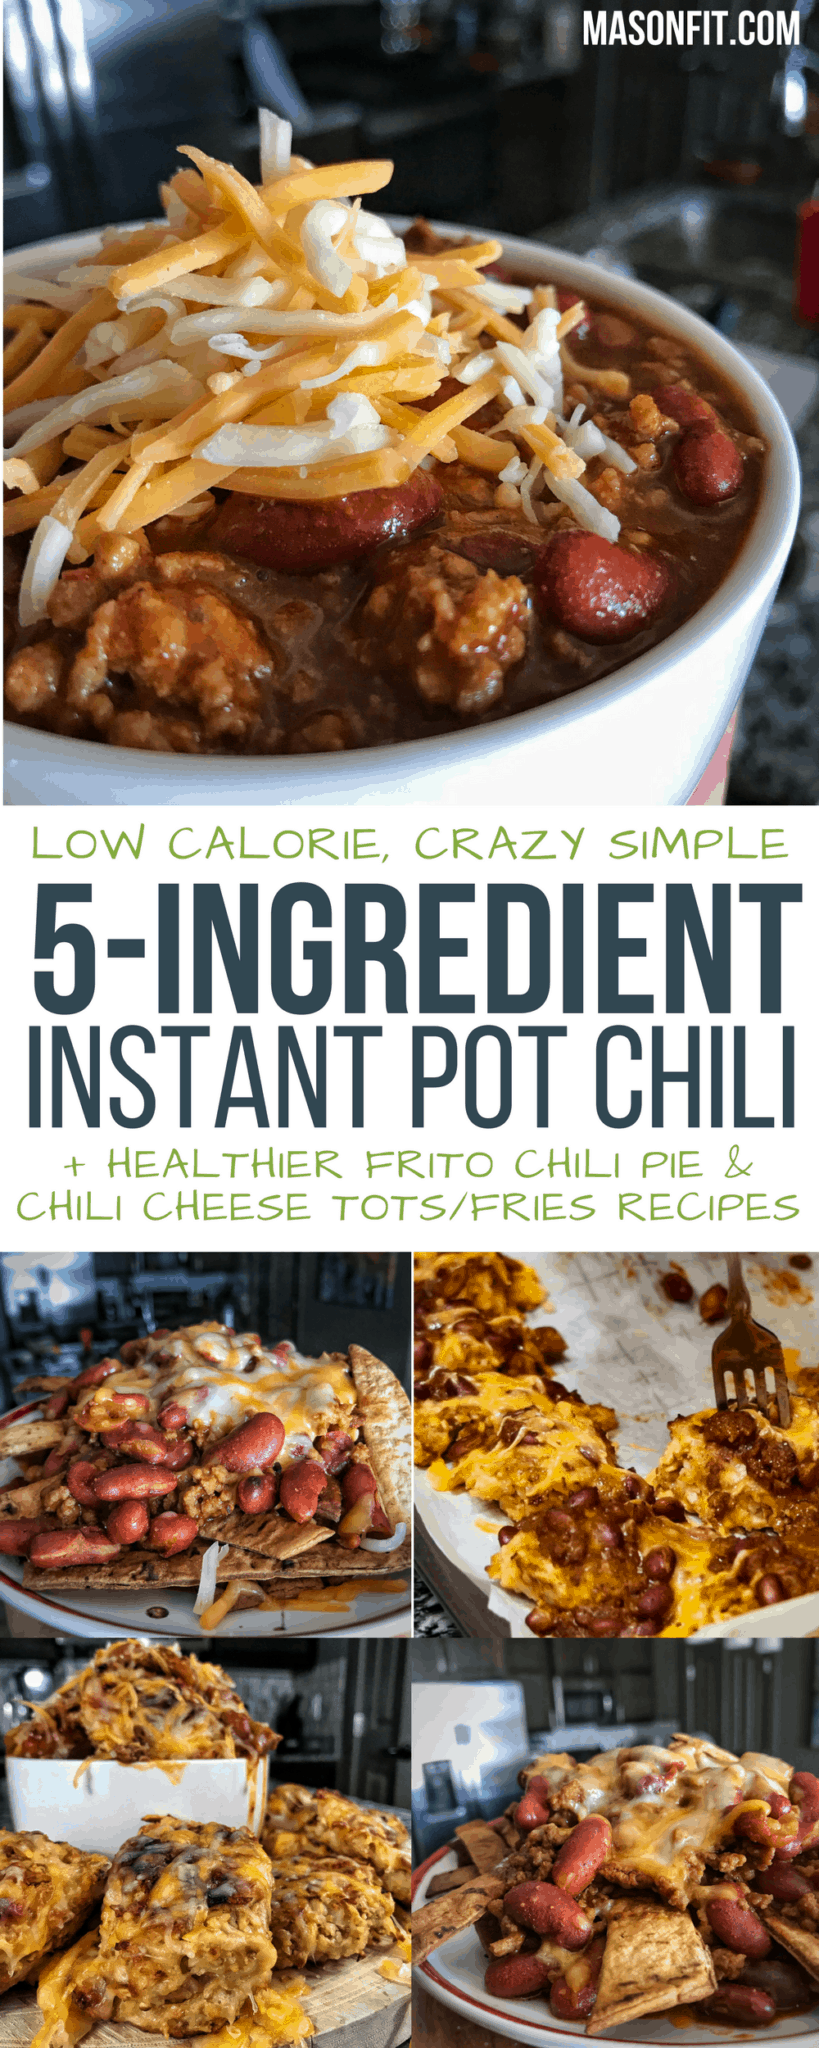 5-Ingredient Instant Pot Chili with Healthier Frito Chili Pie and Chili ...